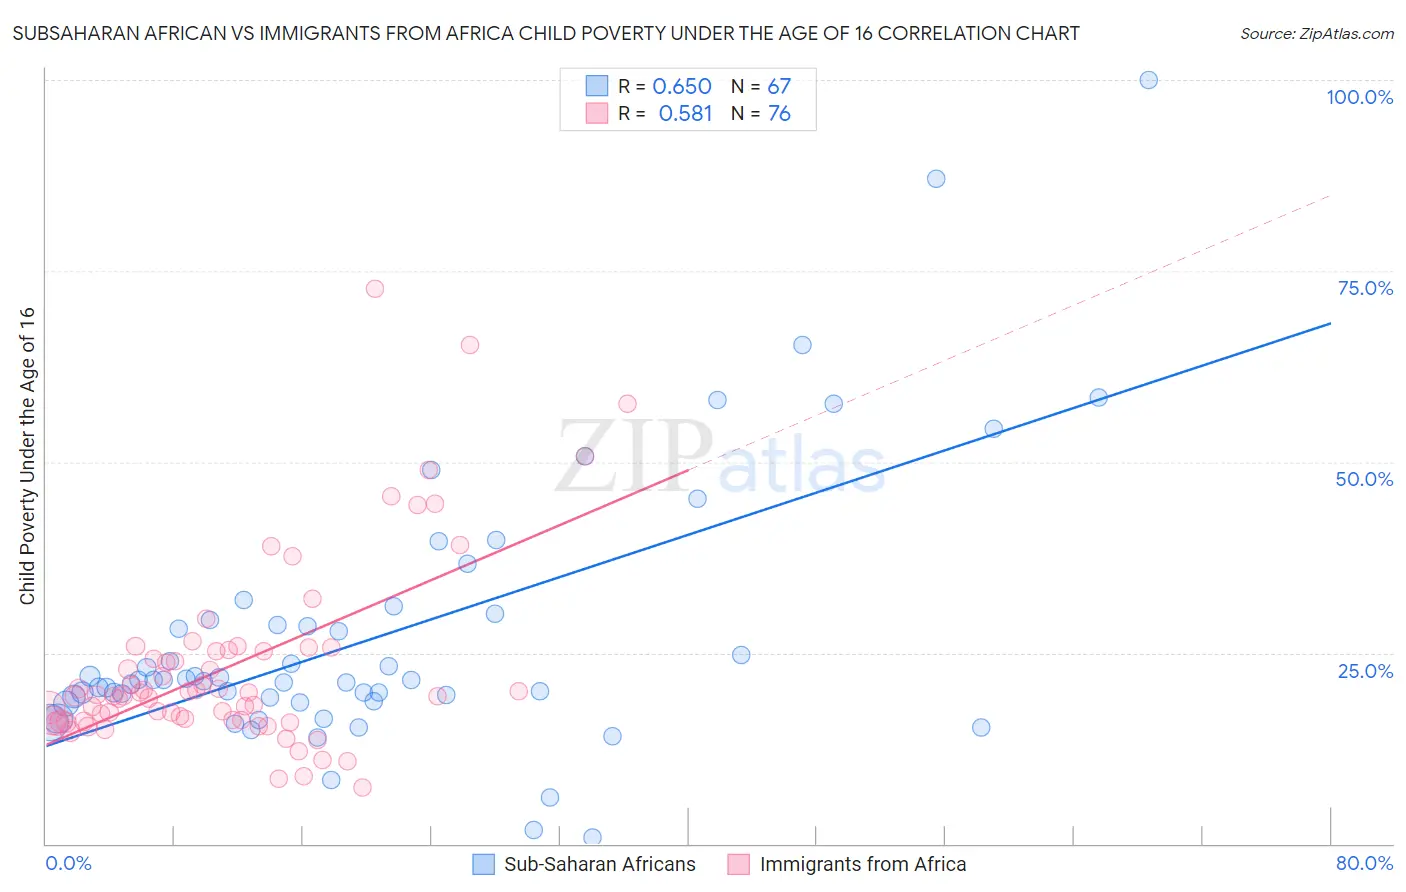 Subsaharan African vs Immigrants from Africa Child Poverty Under the Age of 16